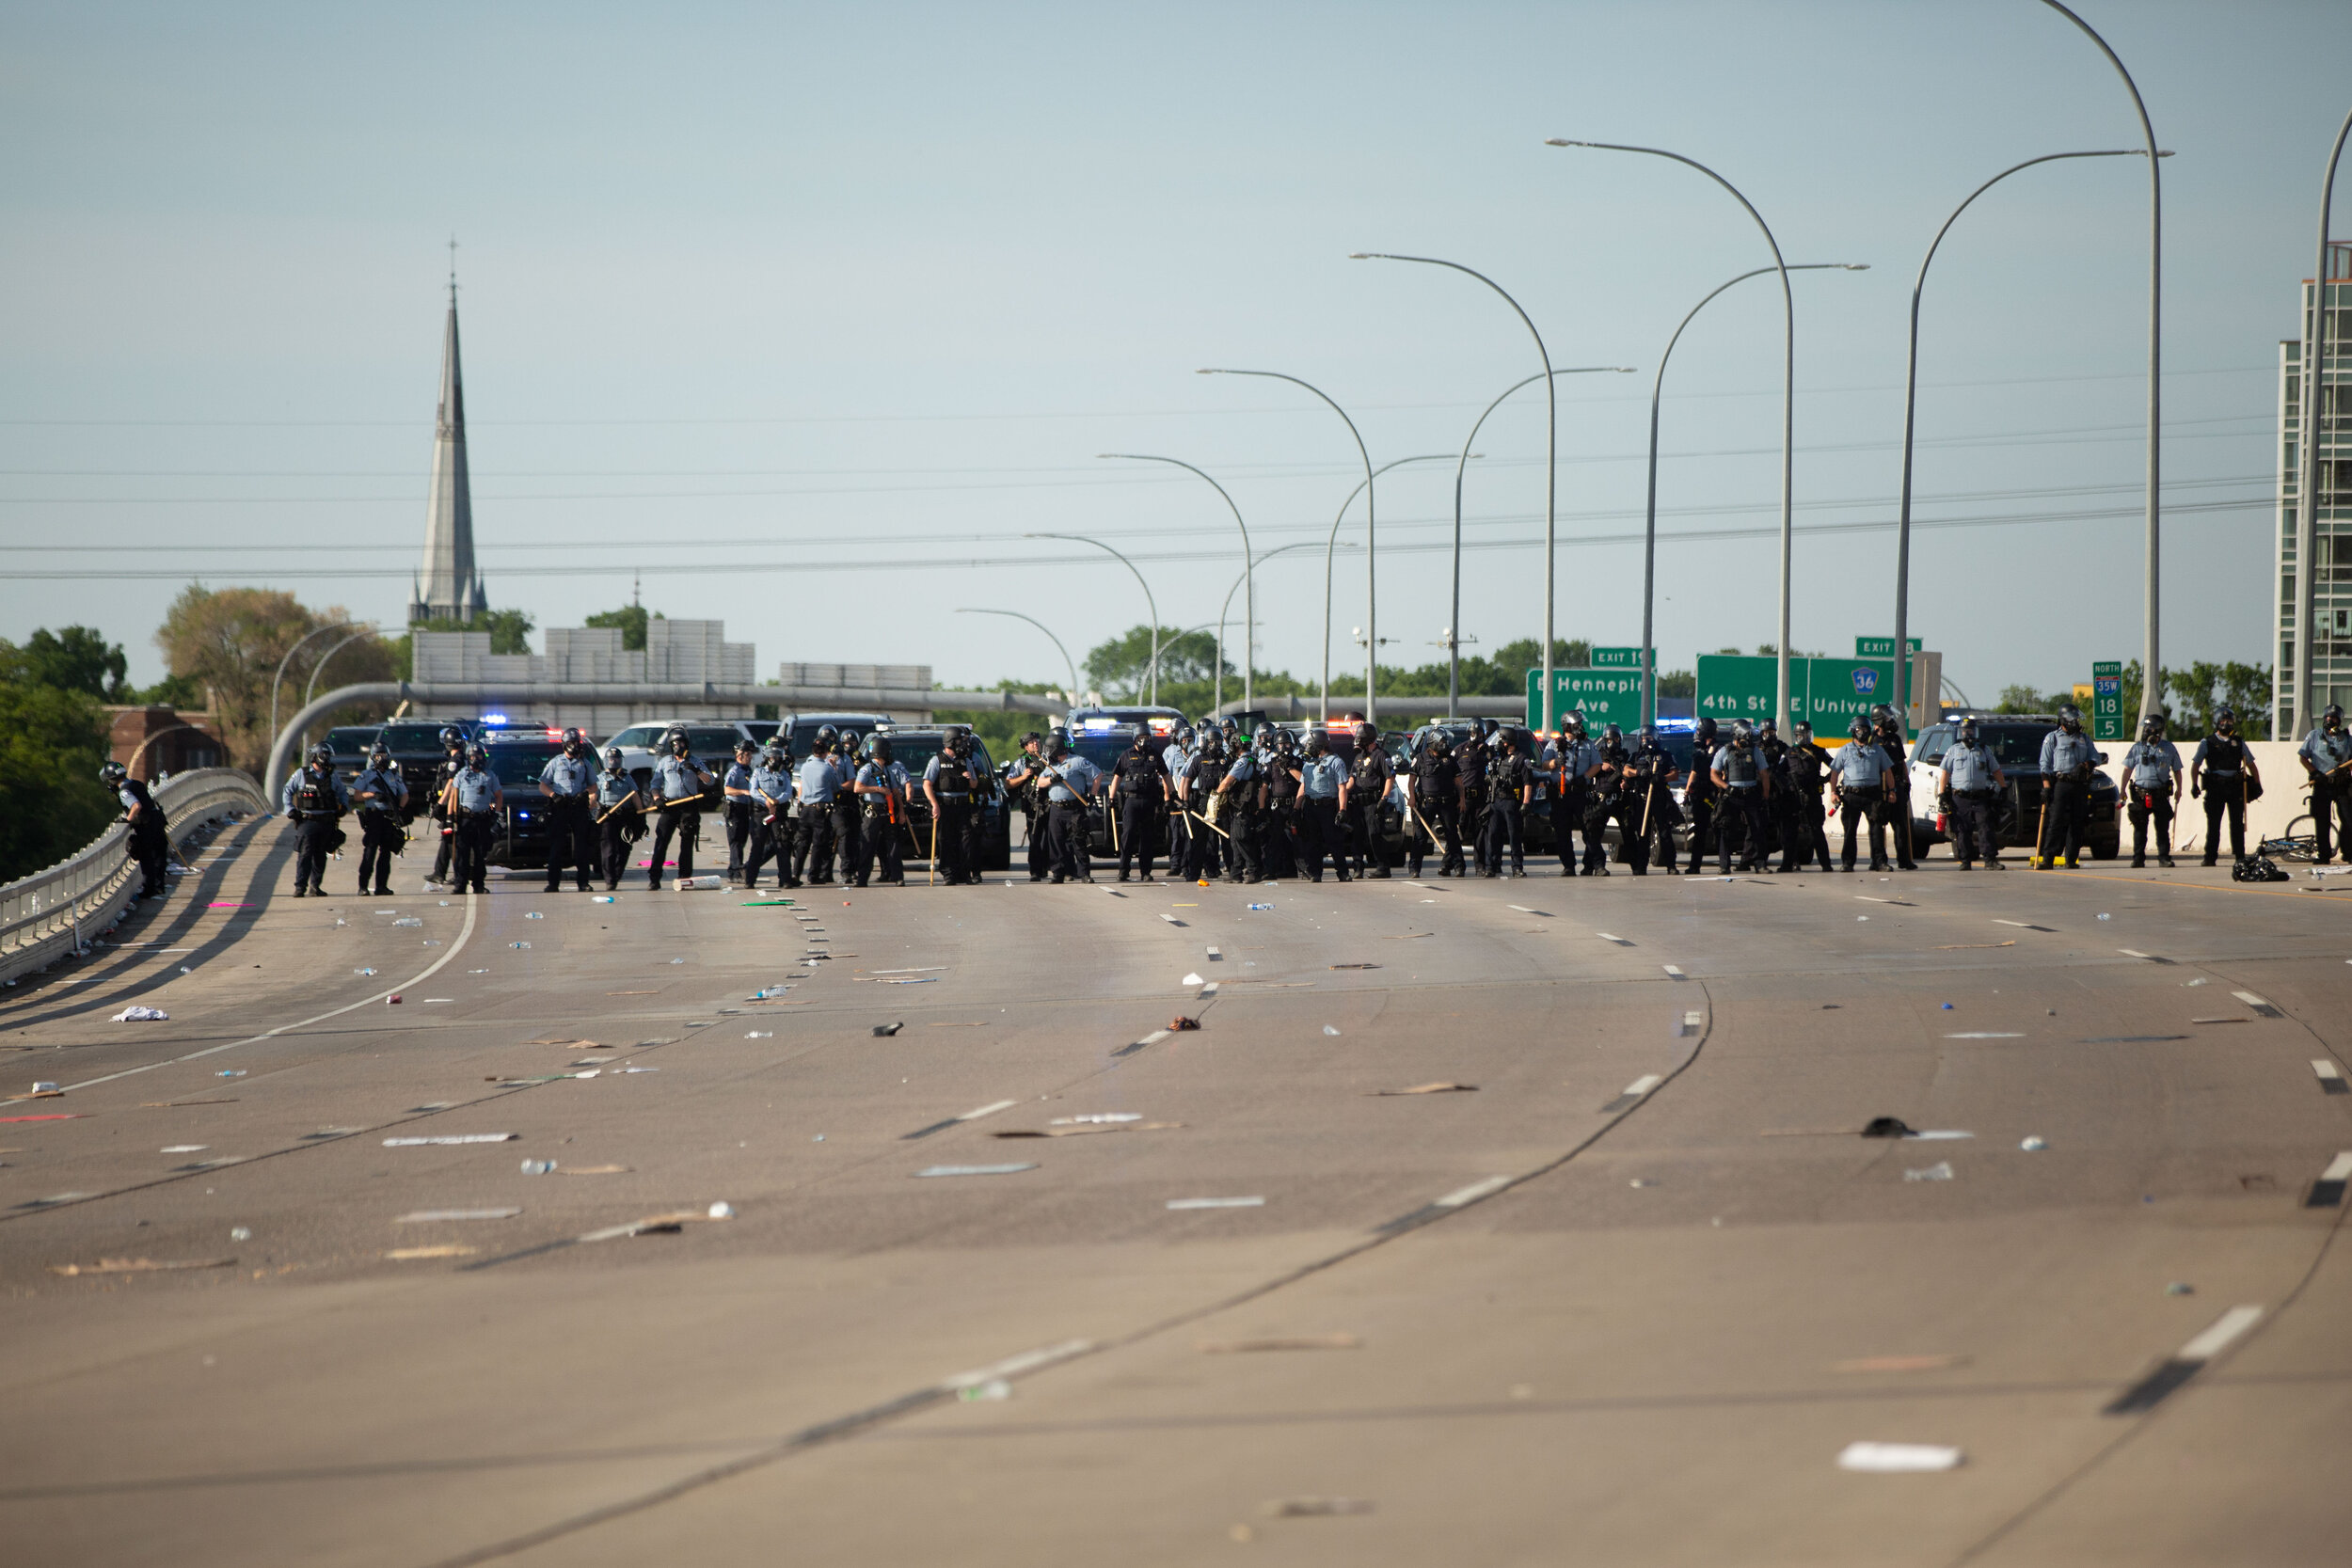  Police form a line to clear protesters from intestate 35w in Minneapolis, Minnesota after a driver haulign fuel drove through a crowd of protesters on May 31, 2020. Chris Juhn/Zenger 